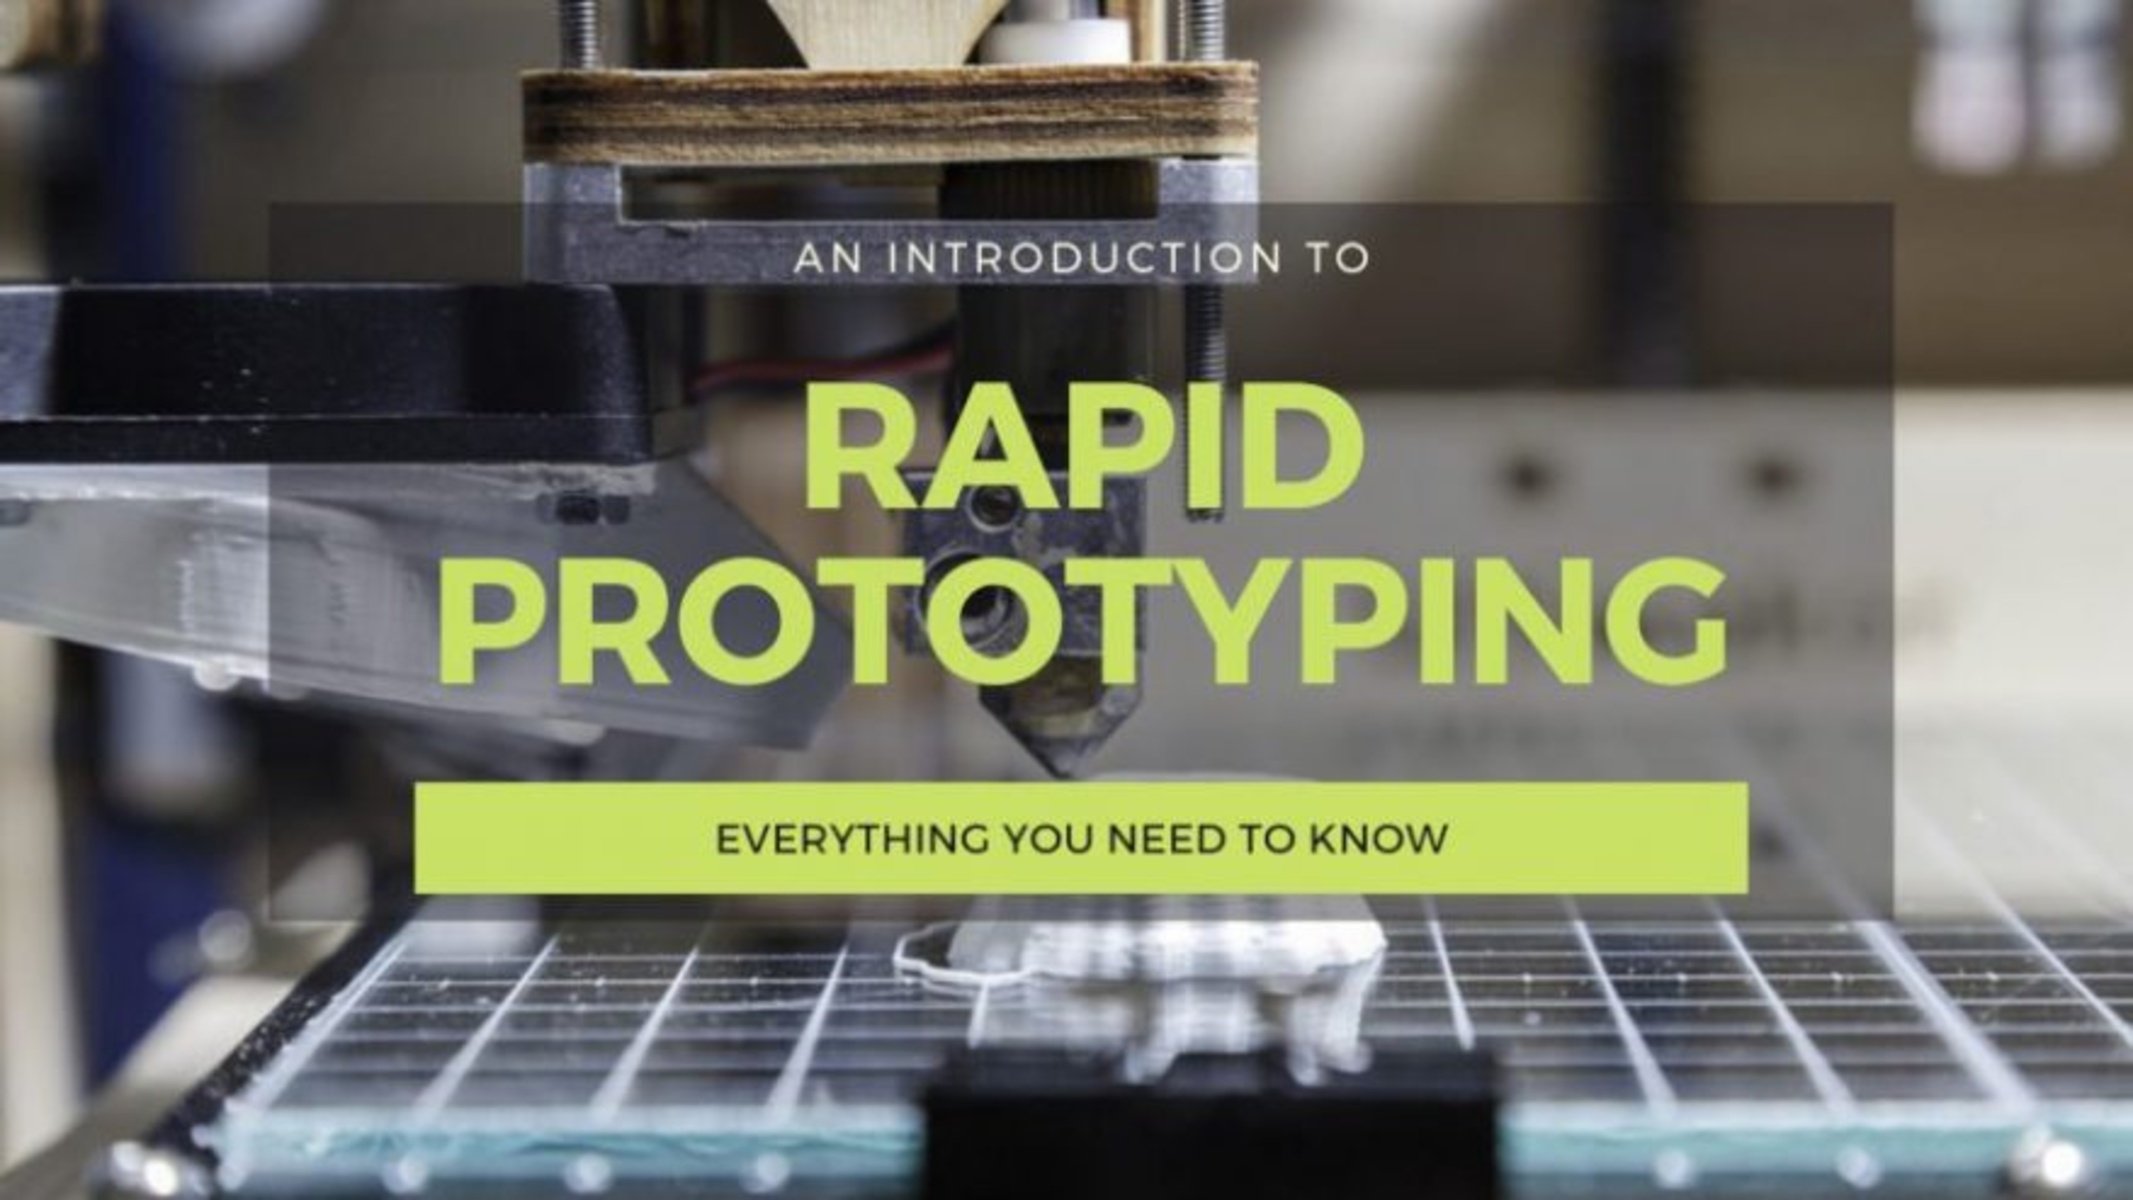 3D Printing A Object Is An Example Of What Kind Of Rapid Prototyping Process?